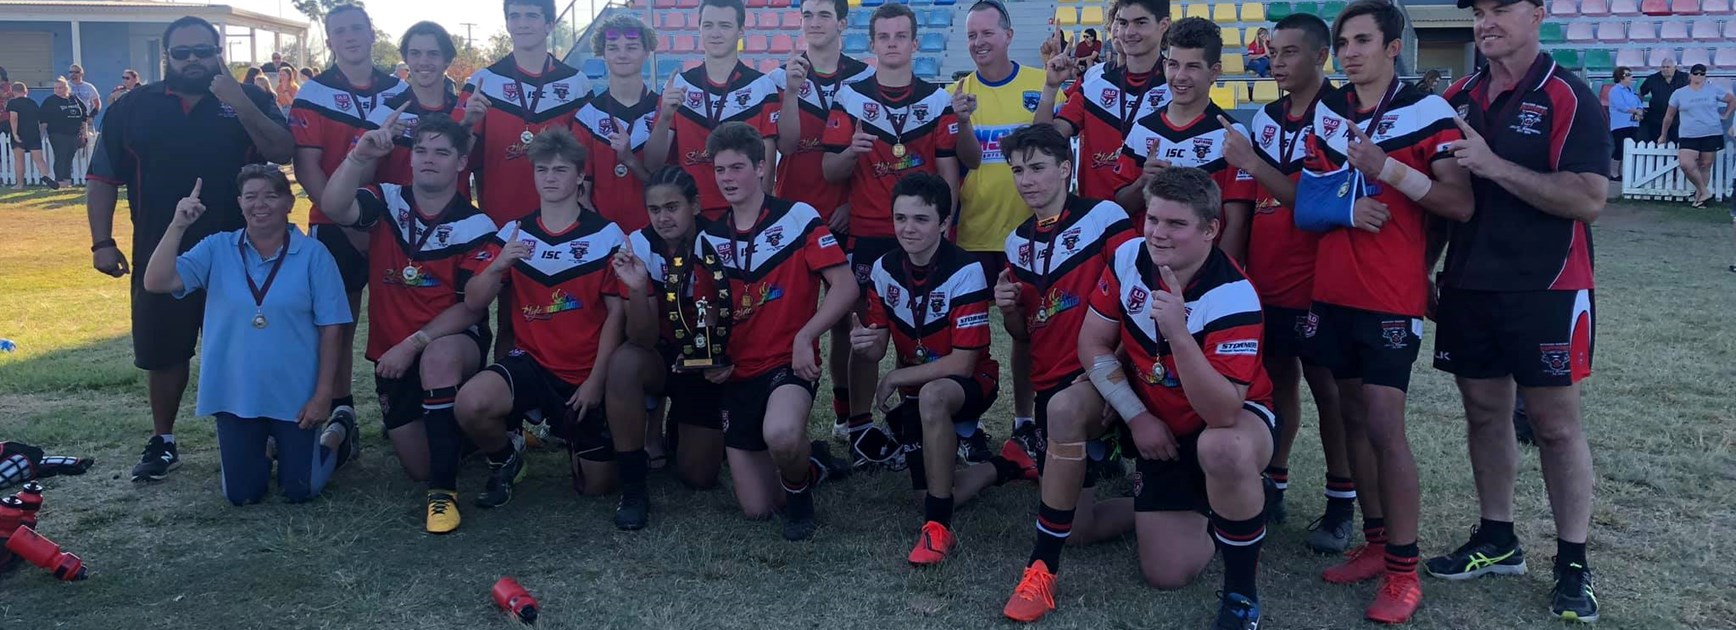 Under 18s join as Bundaberg say 'yes'